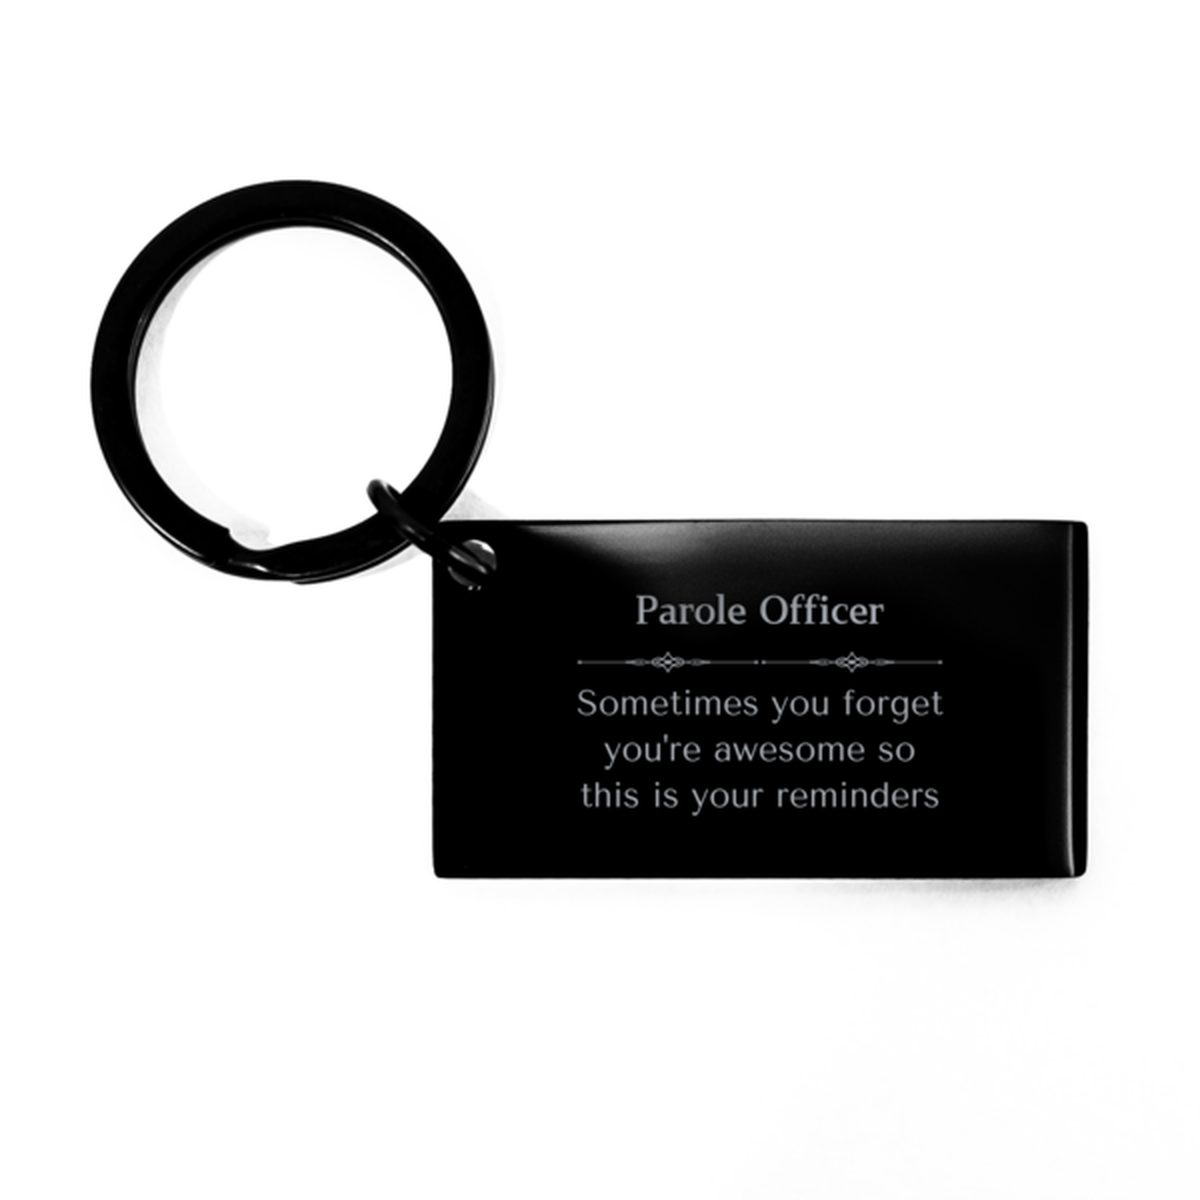 Sentimental Parole Officer Keychain, Quilter Sometimes you forget you're awesome so this is your reminders, Graduation Christmas Birthday Gifts for Parole Officer, Men, Women, Coworkers